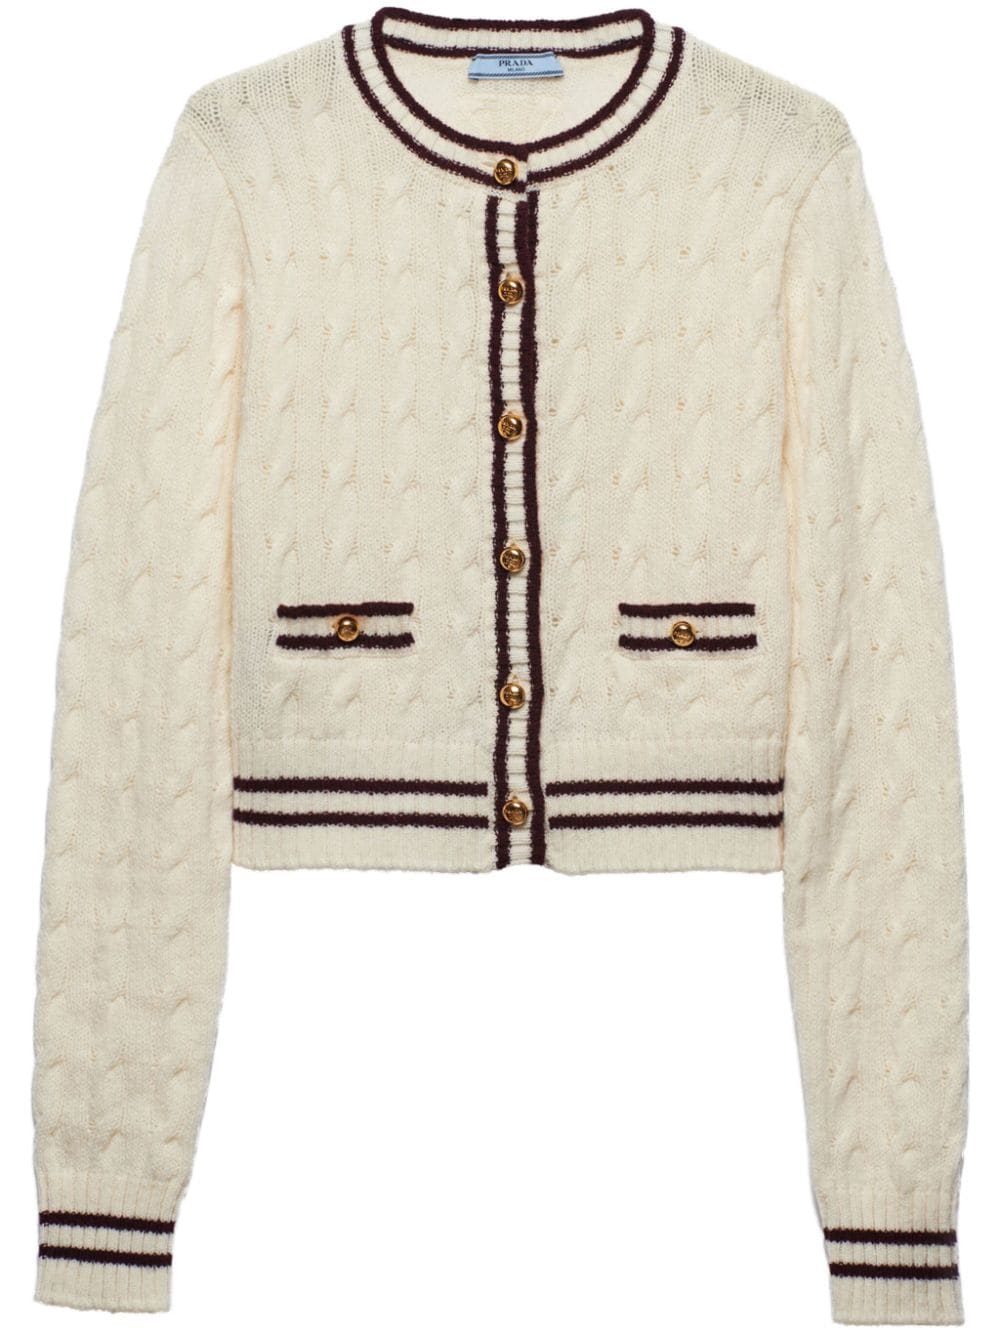 Prada cable-knit wool jumper - White